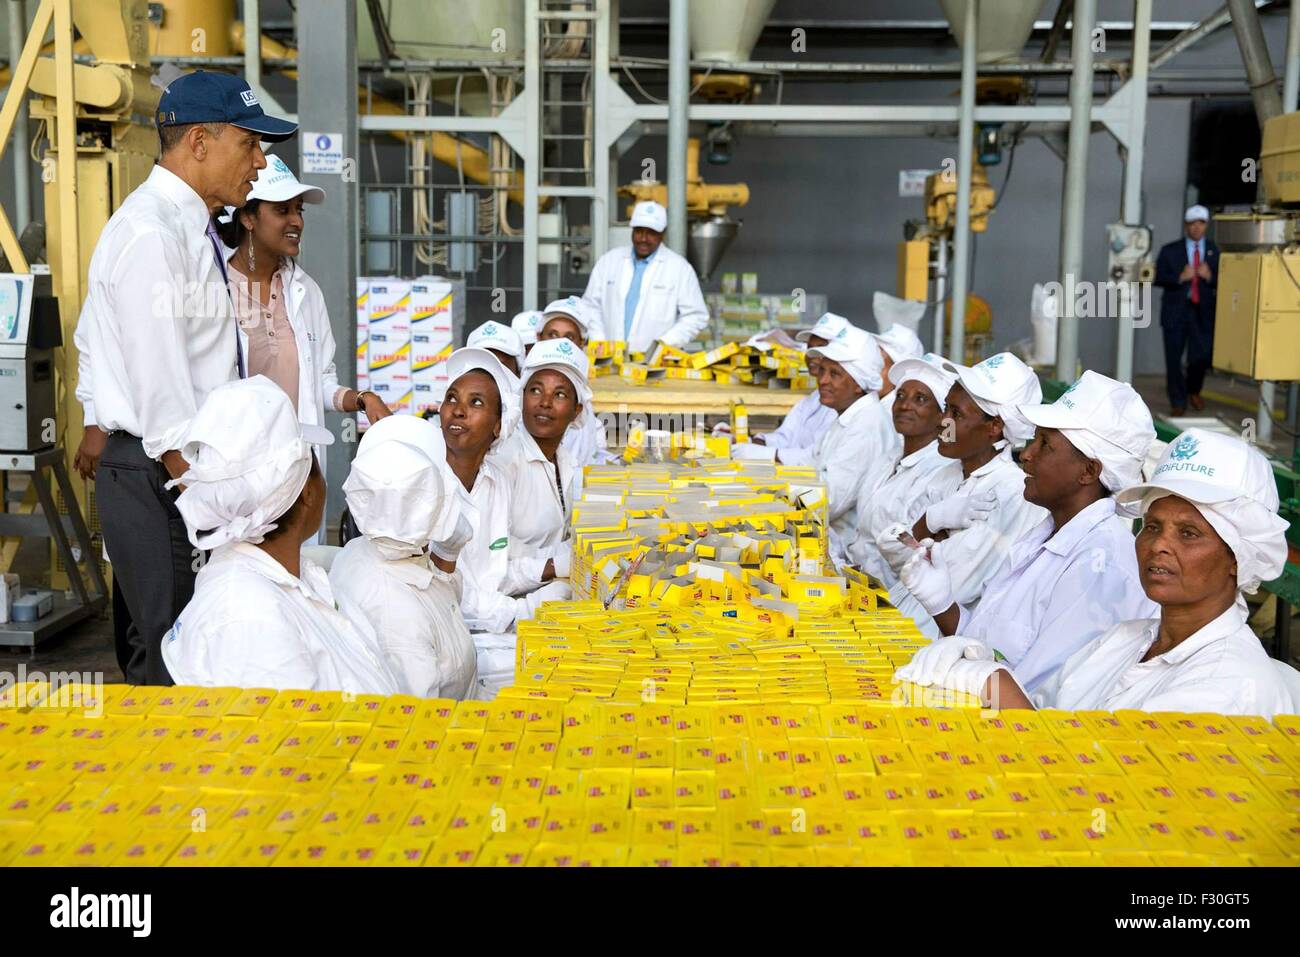 U.S. President Barack Obama greets workers during a tour of the factory floor of [Faffa Foods], which is supported by the U.S. government's Feed the Future program July 28, 2015 in Addis Ababa, Ethiopia. Stock Photo